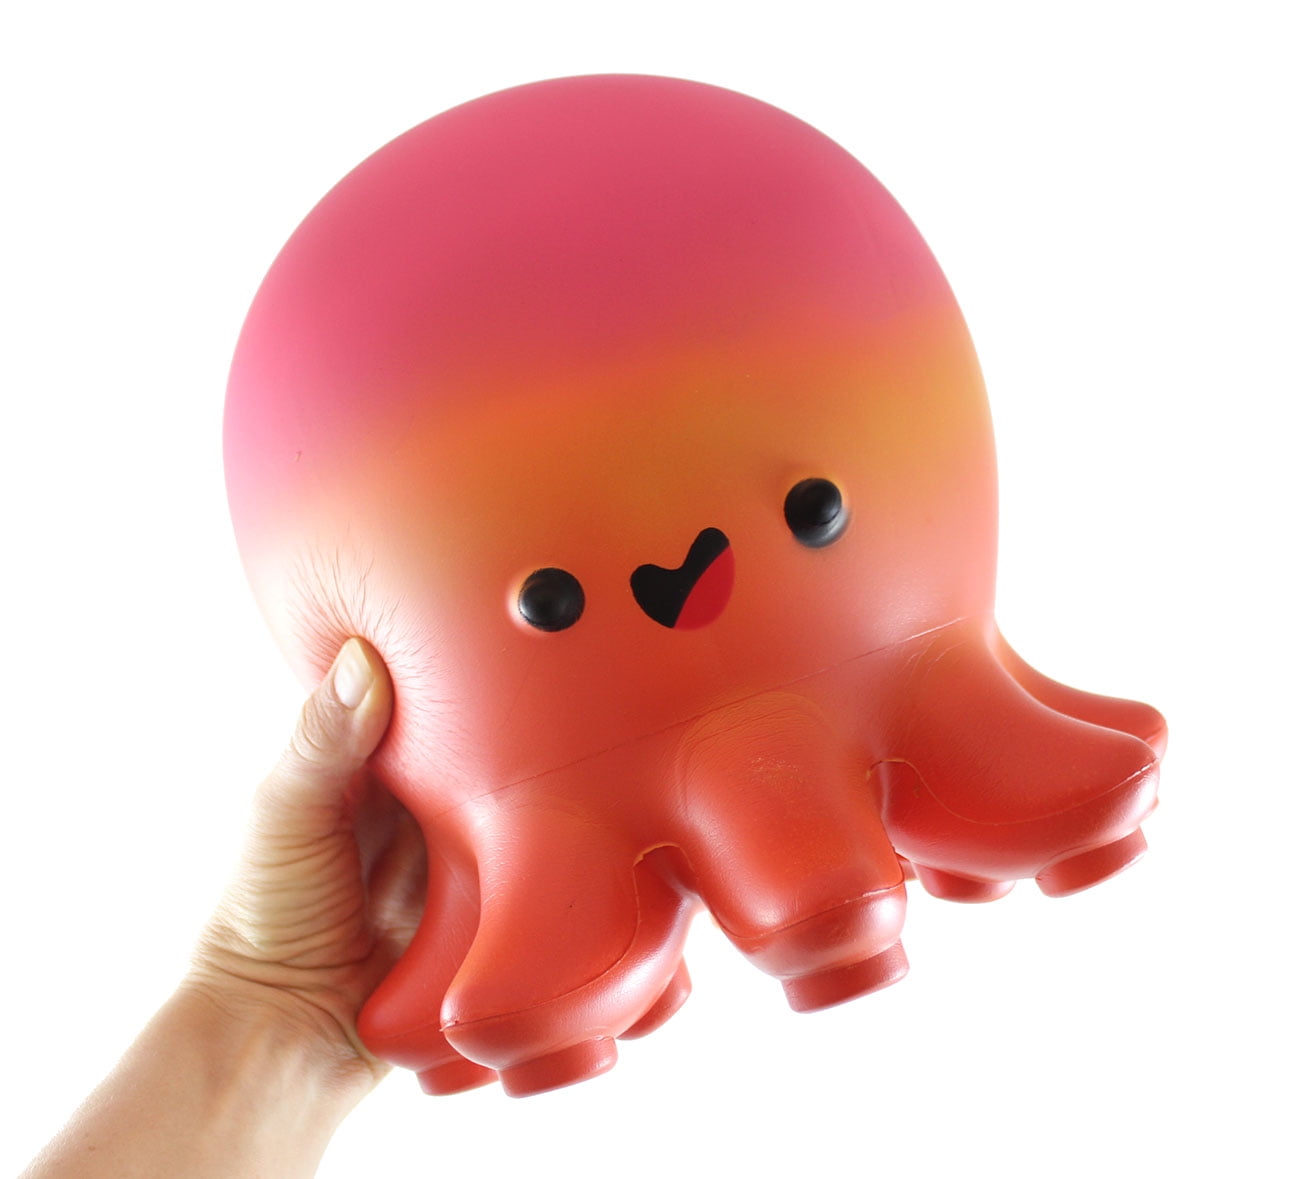 Collectable Octopus Medium Design Sand Animal Toy Stress Relief 